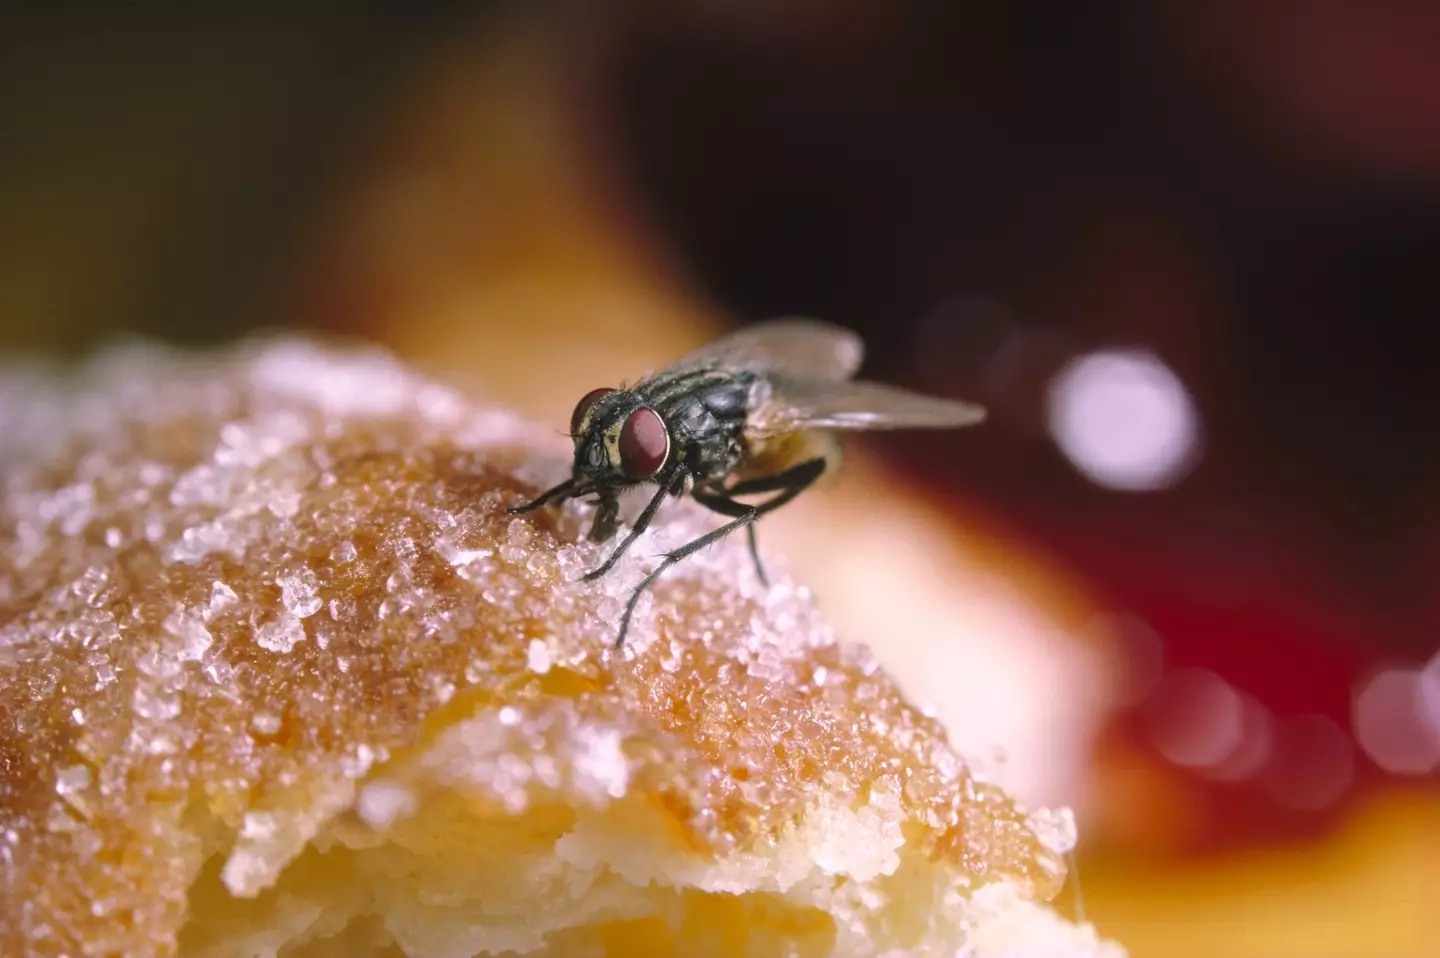 A house fly digging into what appears to be a donut. (Getty Images)